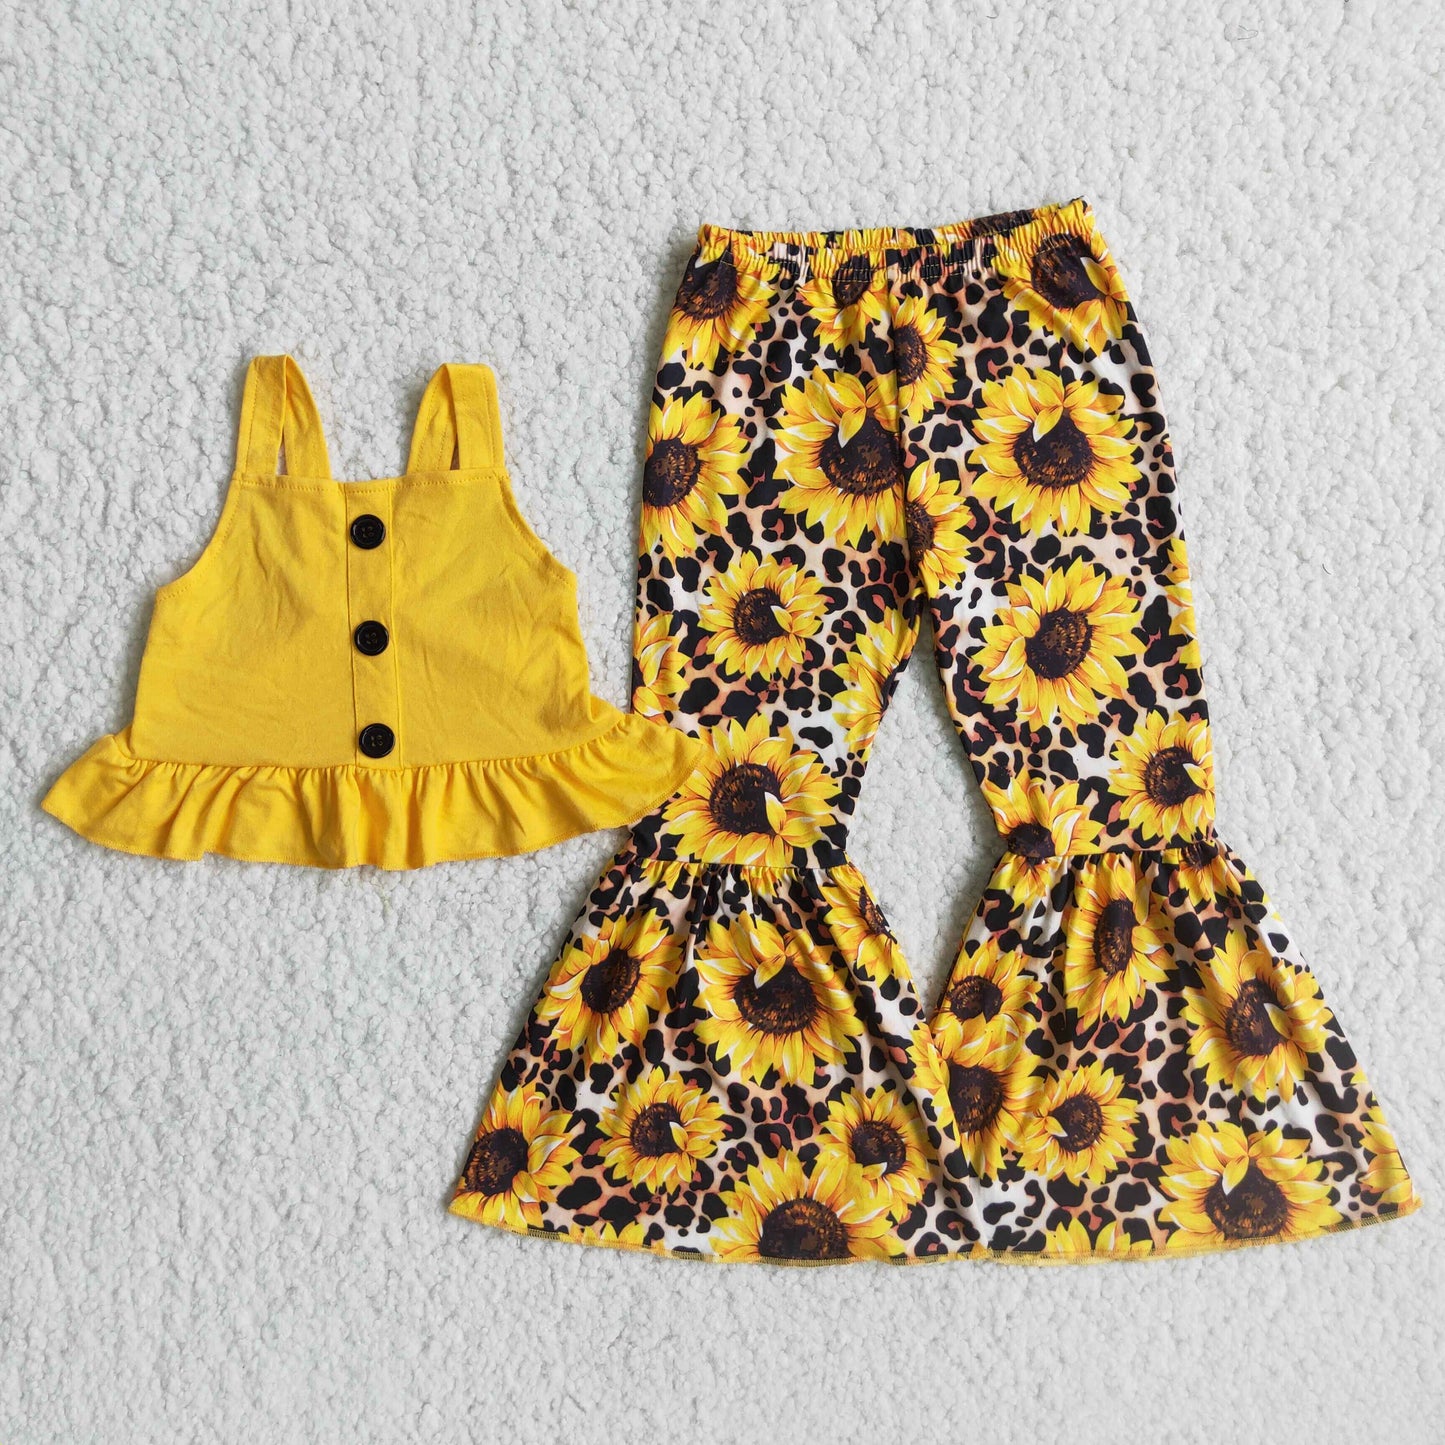 baby girls yellow top sunflower pants 2pcs outfit